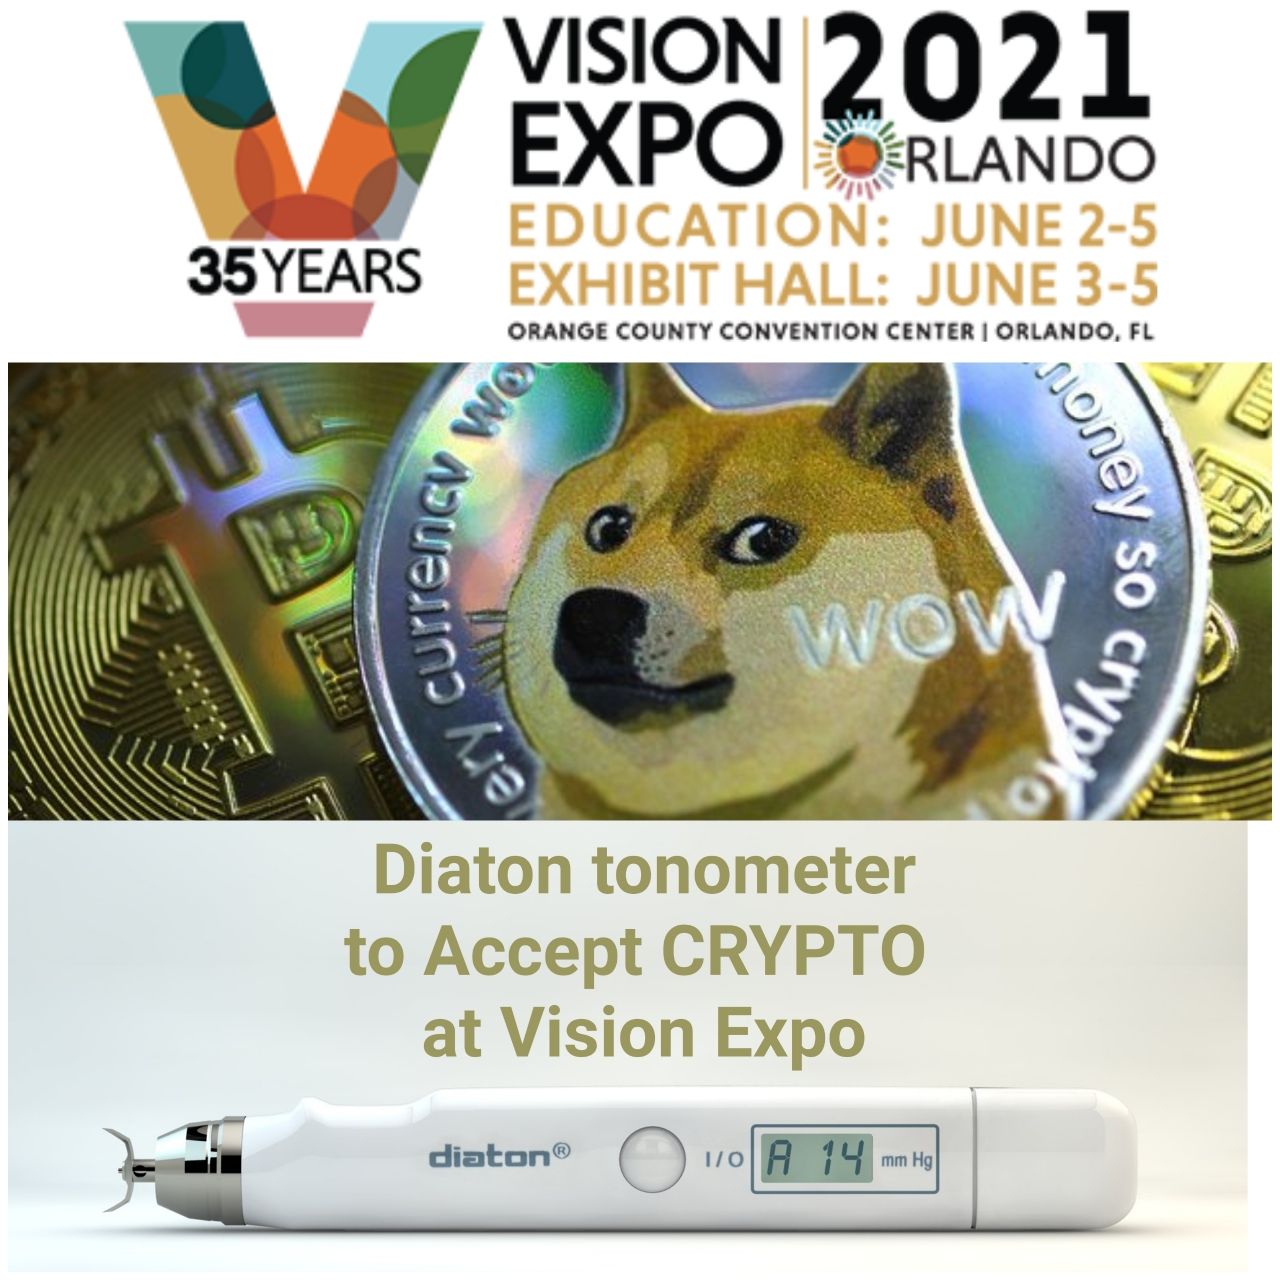 At #VEE2021 Diaton Tonometer 1st to Accept Bitcoin, Ethereum, Dogecoin for Payments at The International Vision Expo 2021